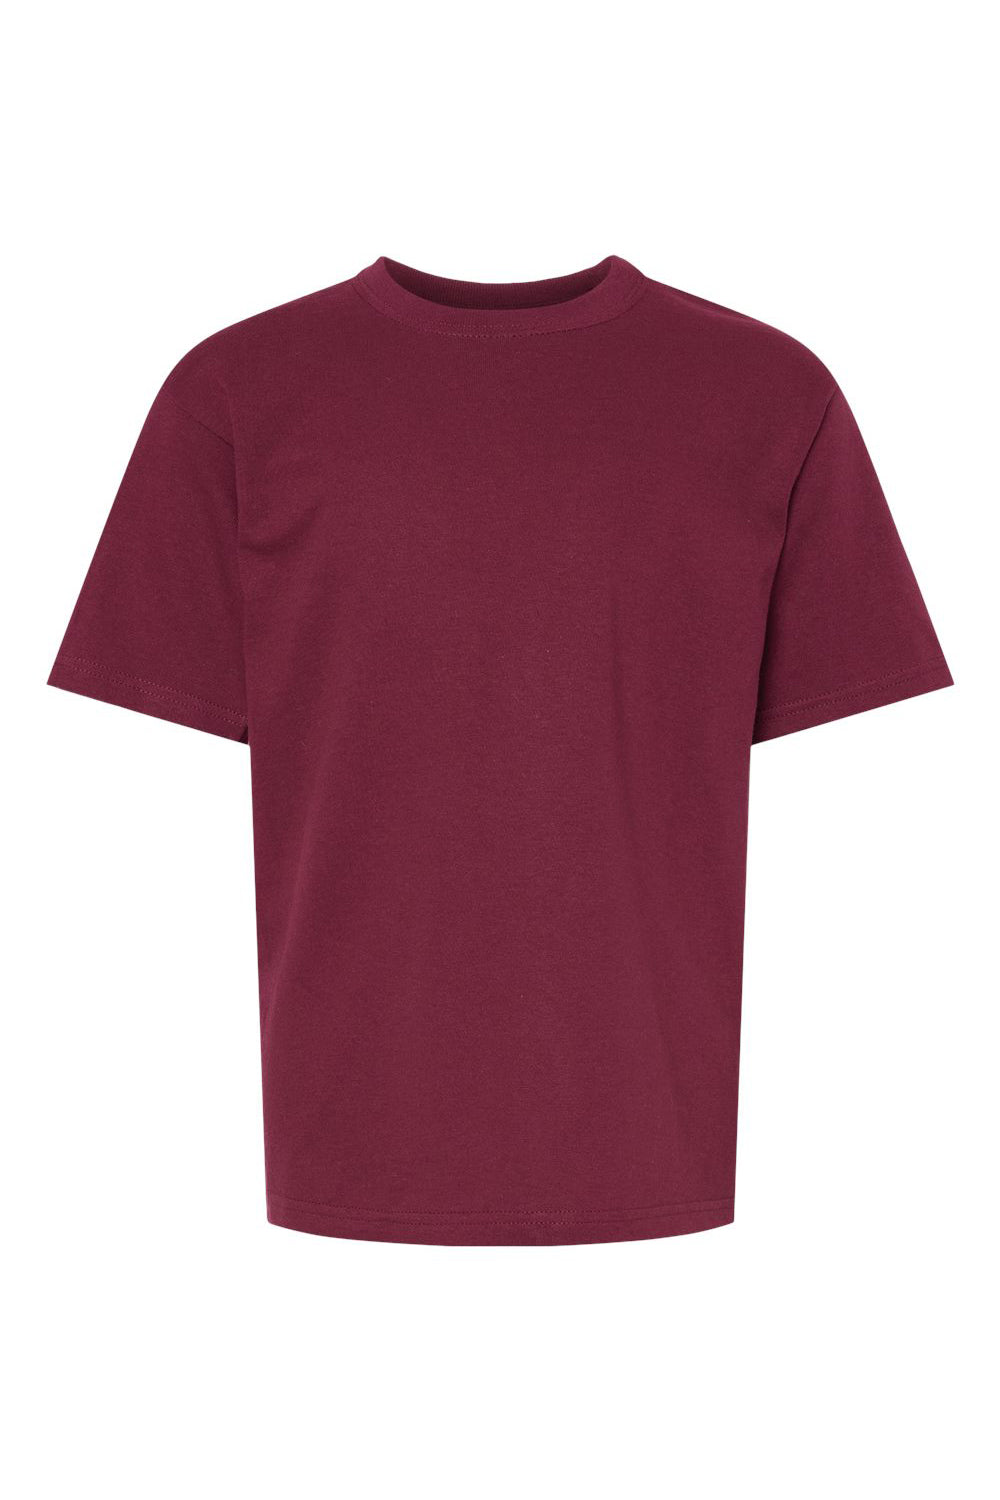 M&O 4850 Youth Gold Soft Touch Short Sleeve Crewneck T-Shirt Maroon Flat Front